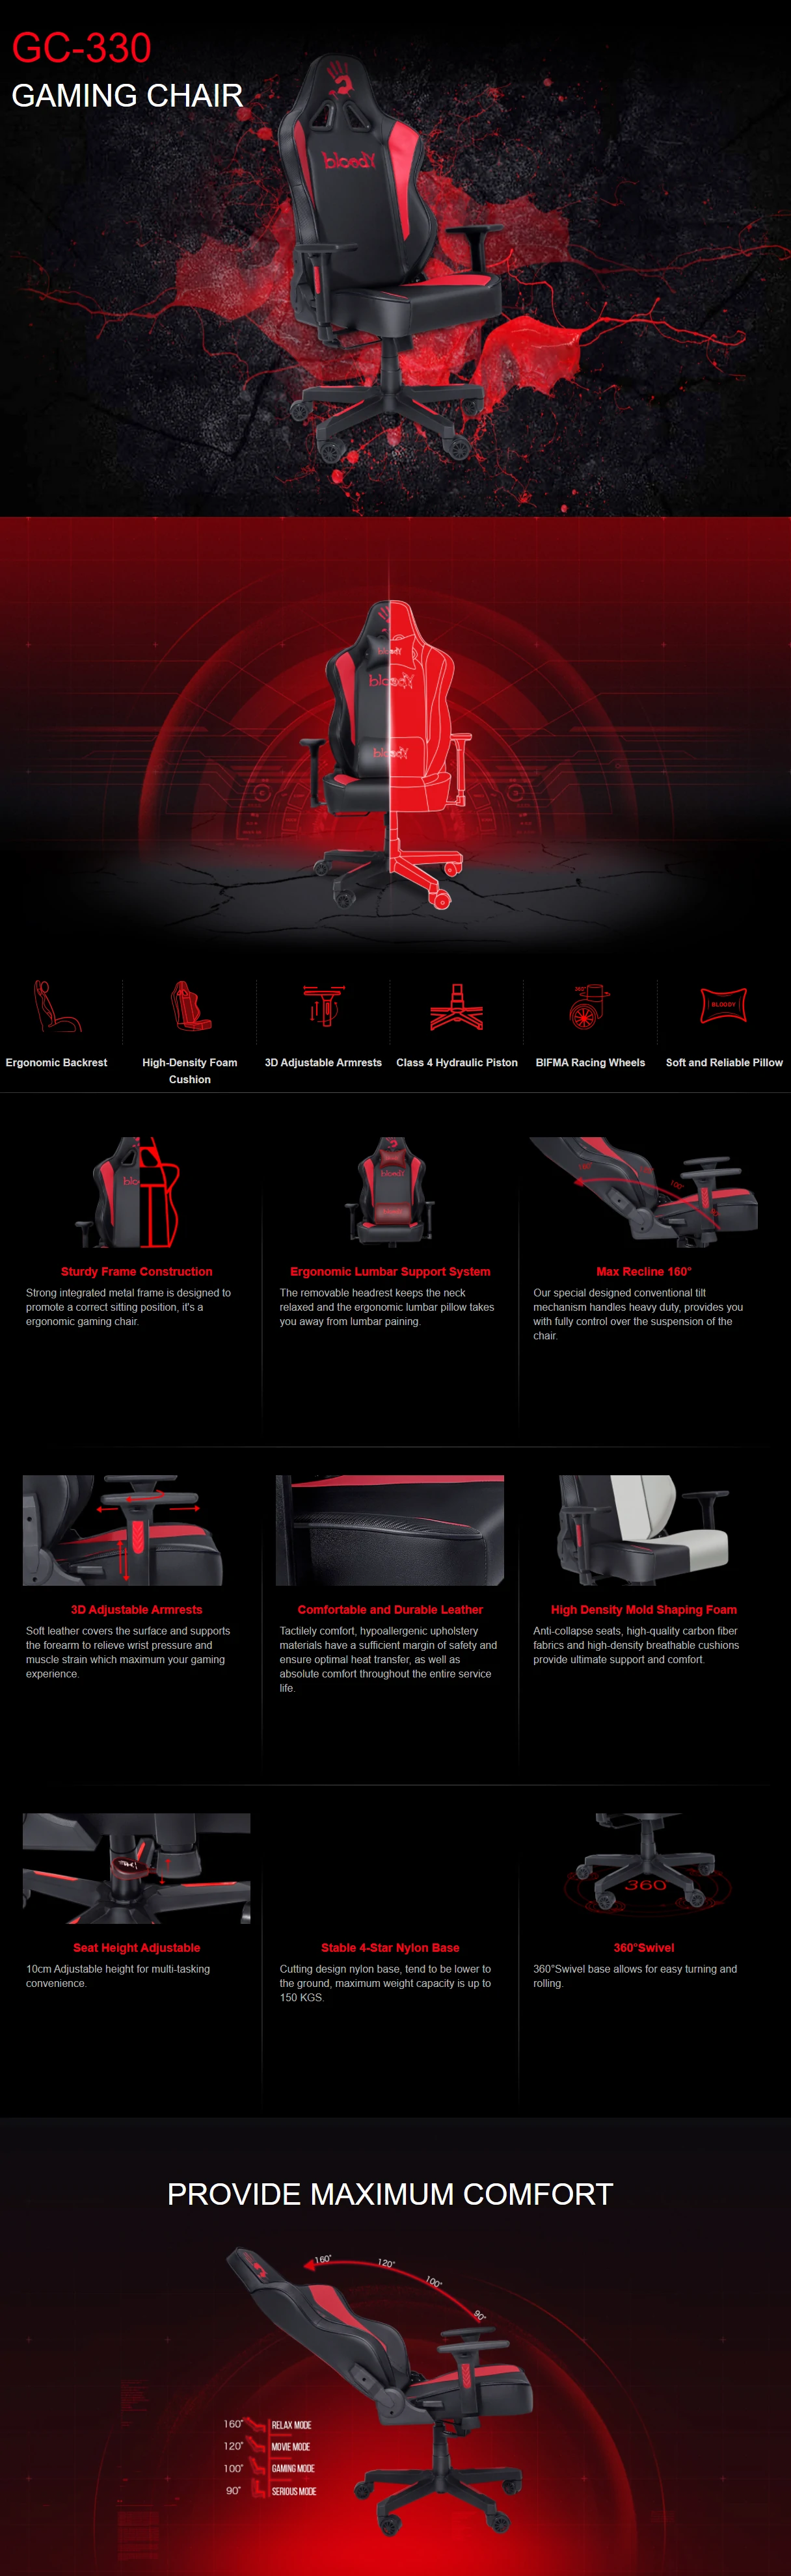 Overview - Bloody - GC-330 Gaming Chair